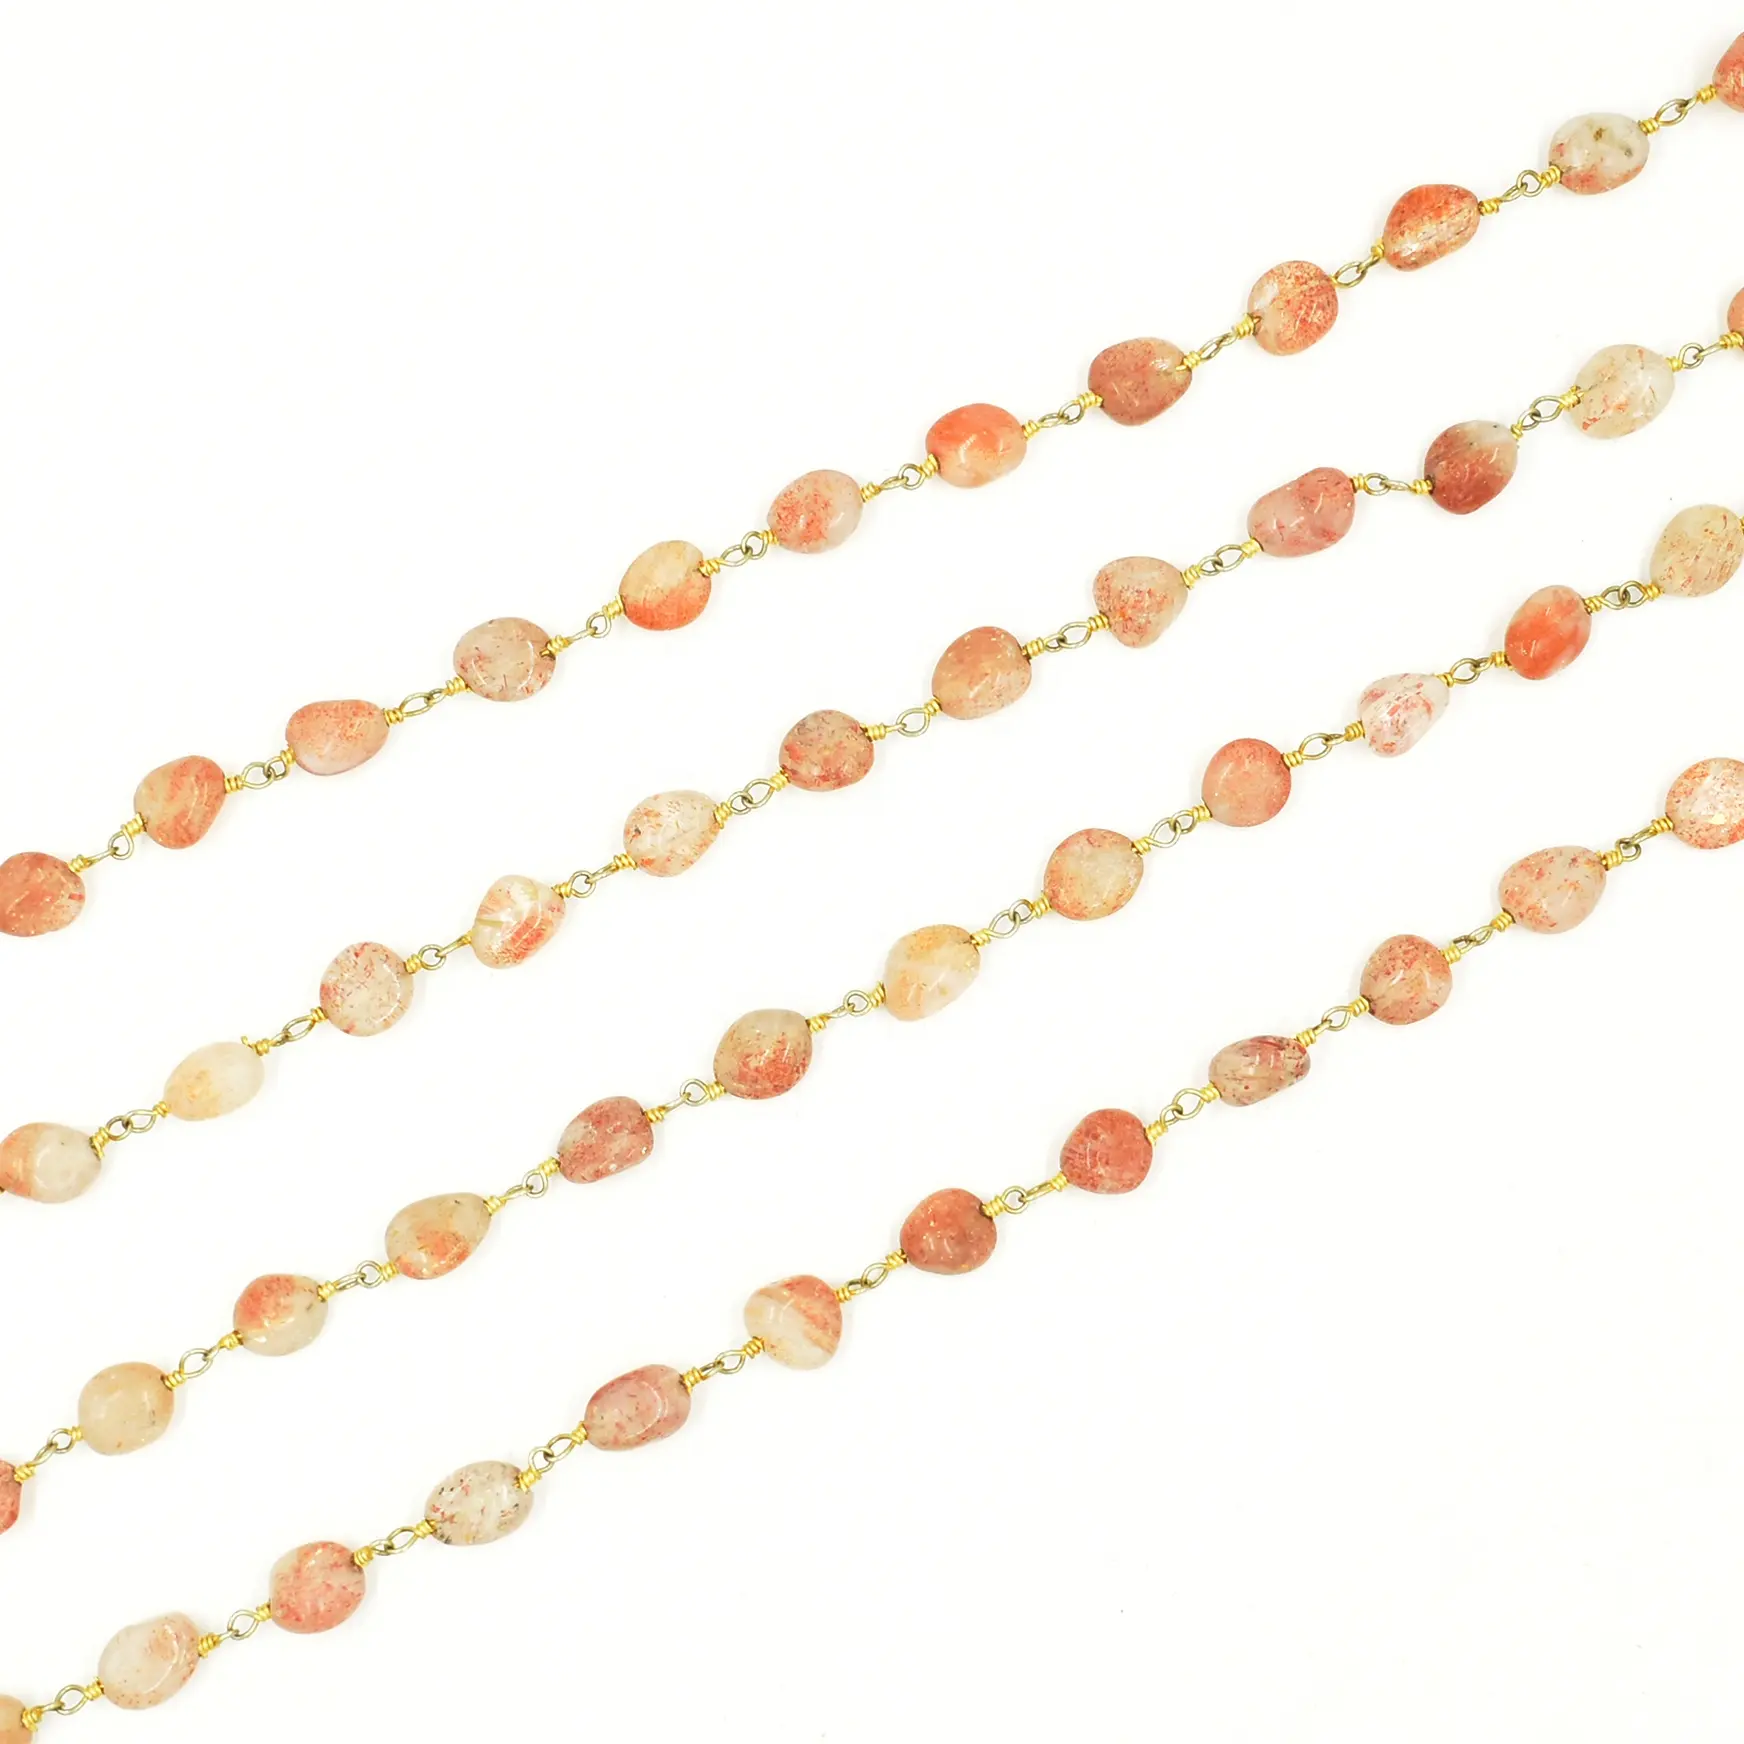 Beaded Rosary Chain Natural Sunstone Gold Plated Metal Chain, Smooth Nuggets Beads Chain, Home Decoration Chain